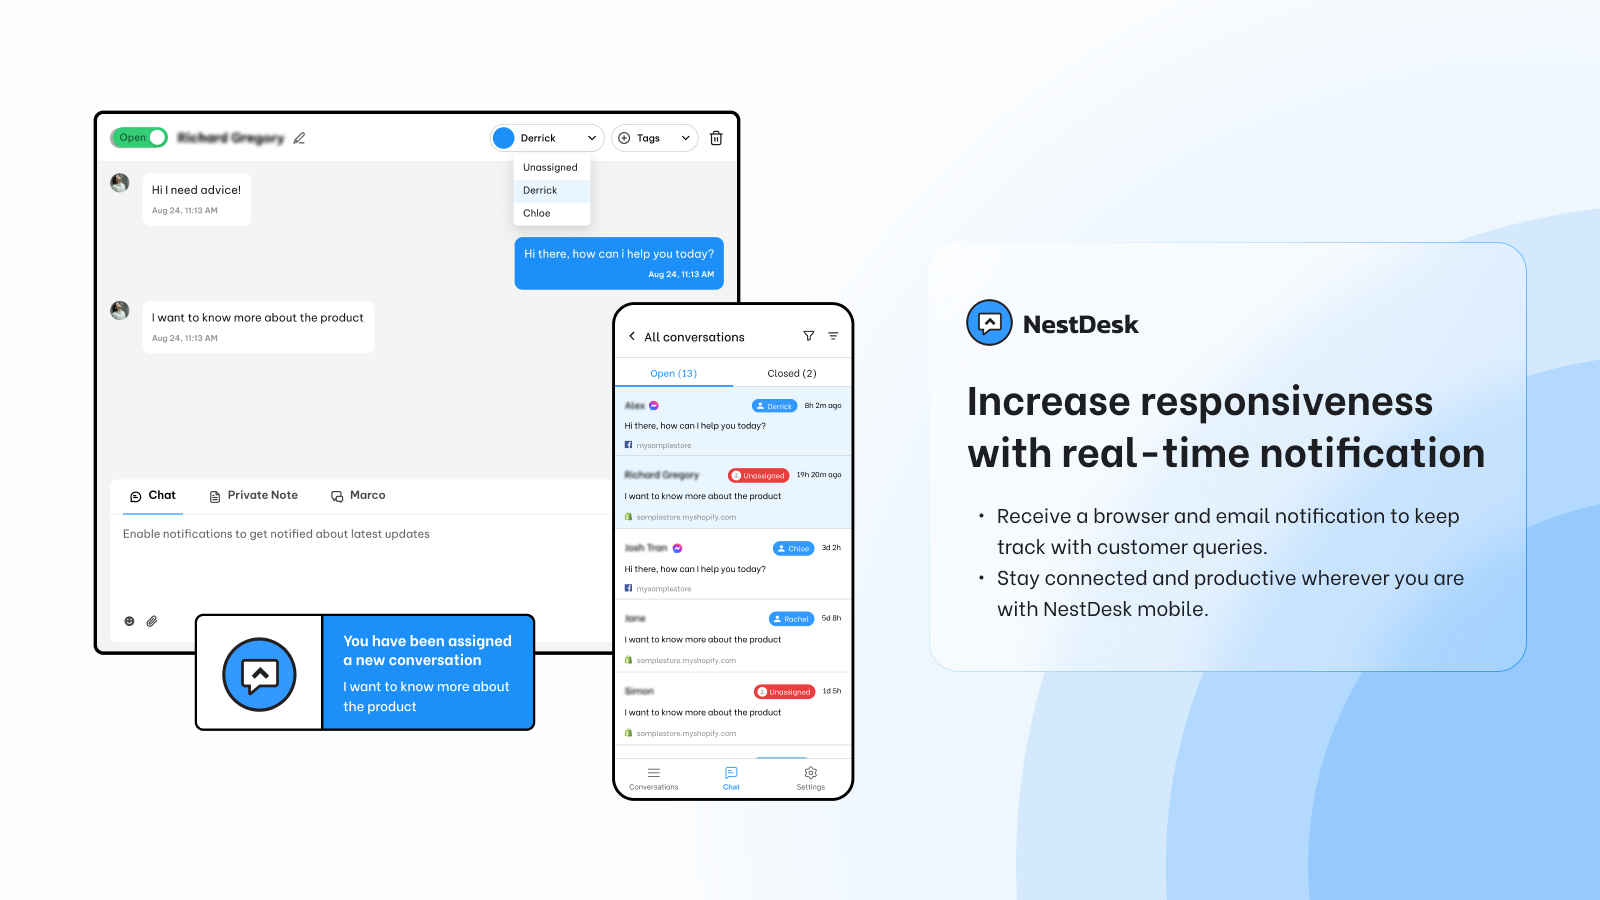 Increase responsiveness with real-time notification